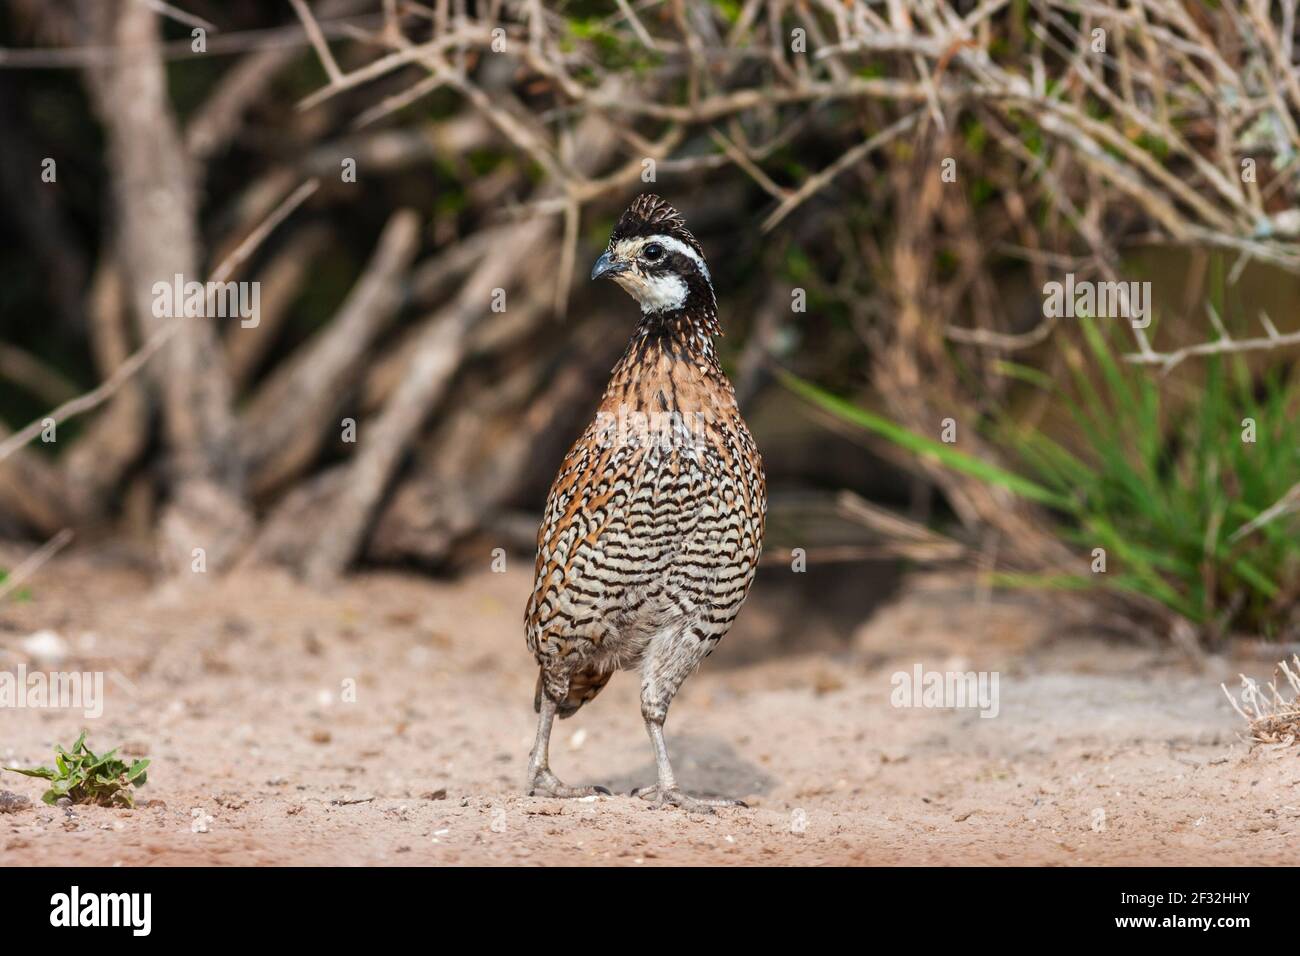 Northern Bobwhite, the  bobwhite quail (Colinus virginianus) which received its name from a distinct, whistled "bobwhite" call, looking for water. Stock Photo